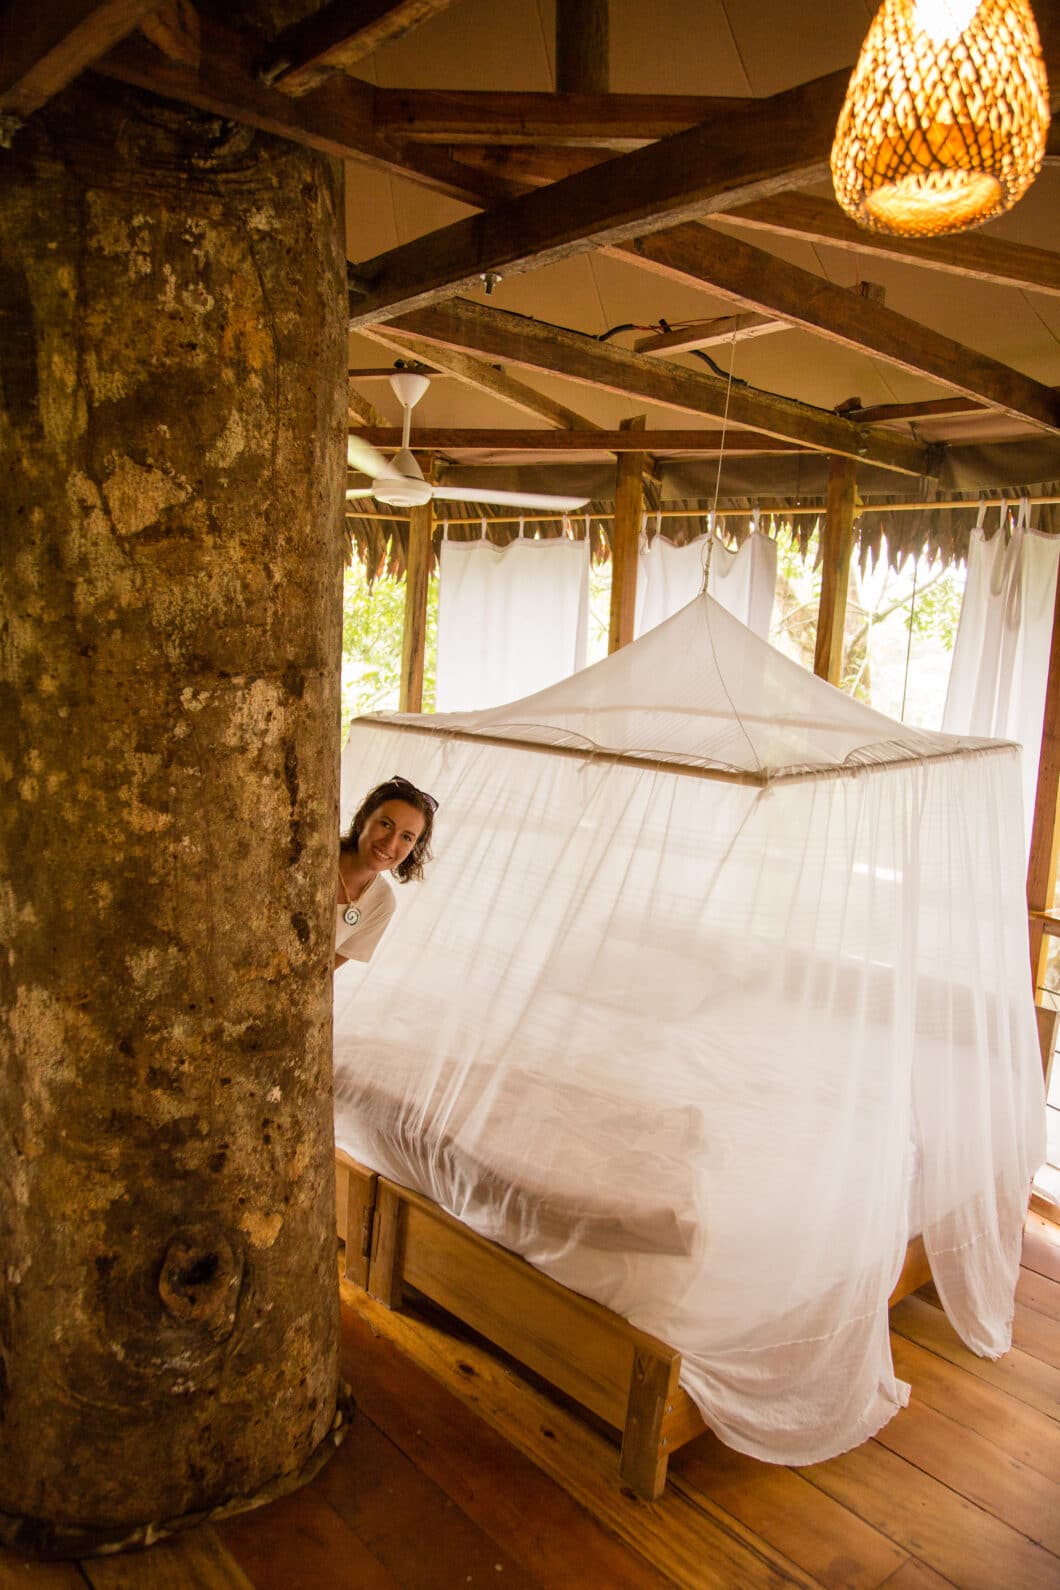 A woman peaks out from around a giant tree trunk in the center of a luxury hut. Behind her, a large bed is canopied with white netting.